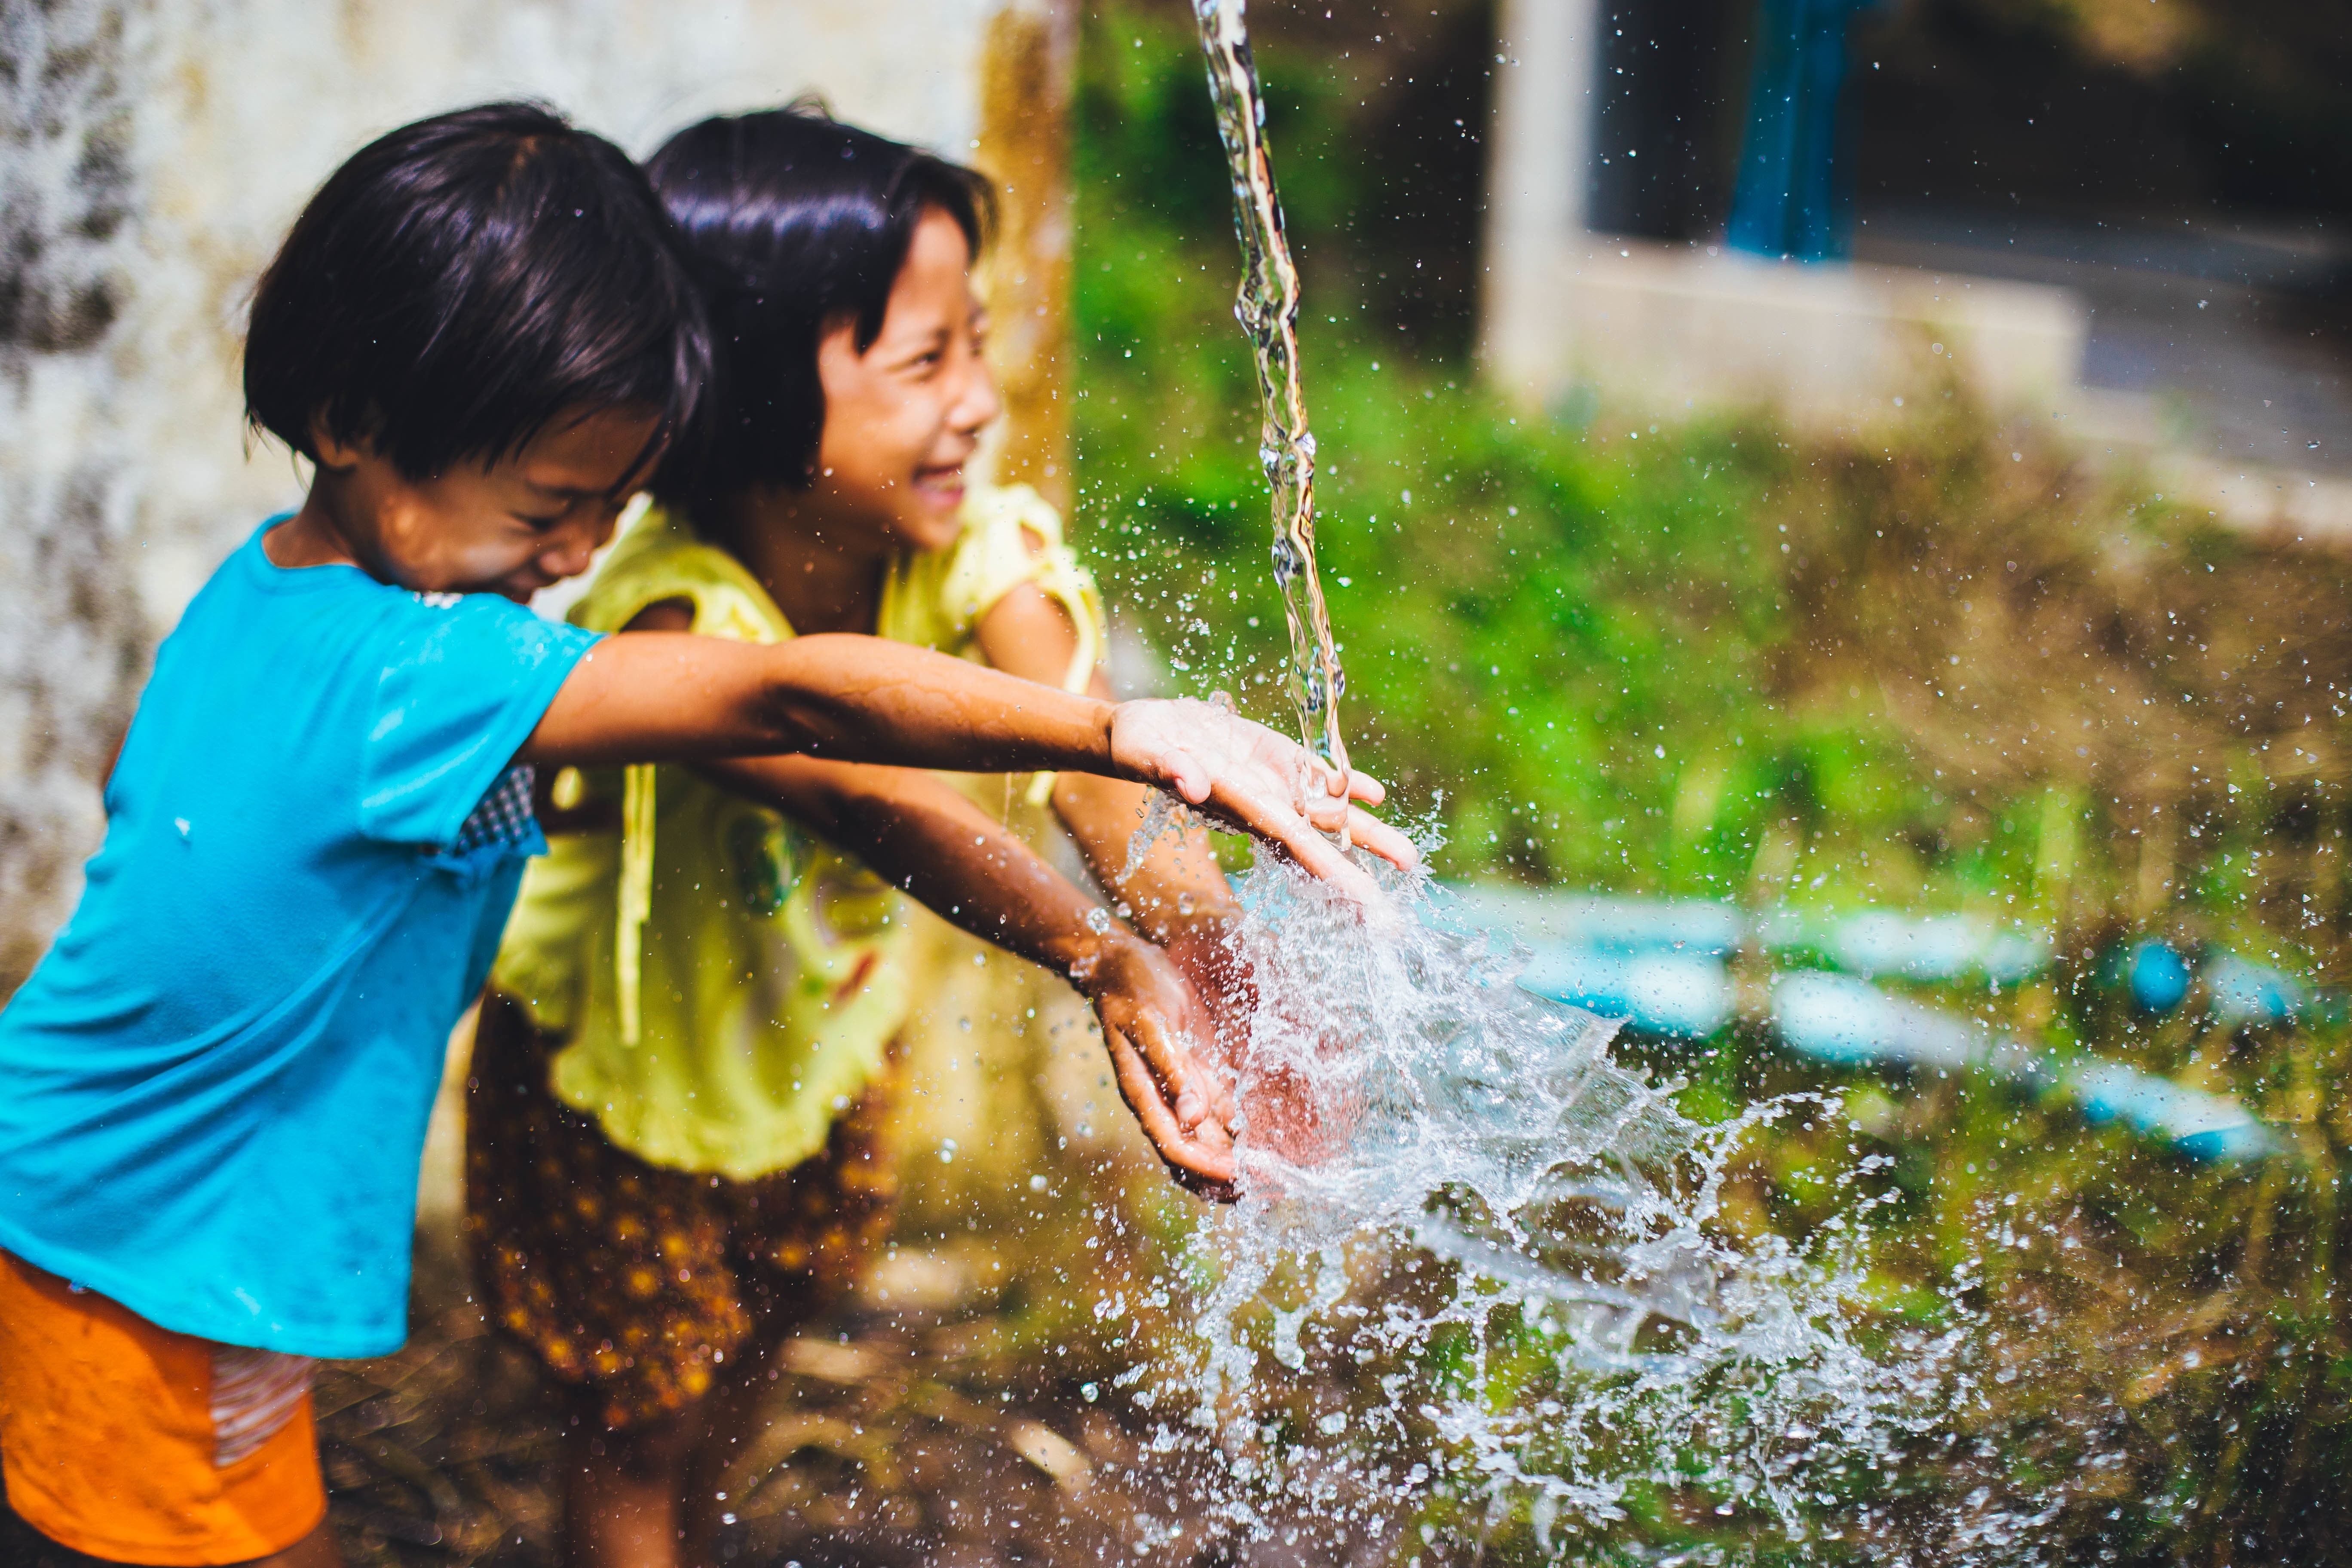 captured photo of two girls playing in a water falling from a hose